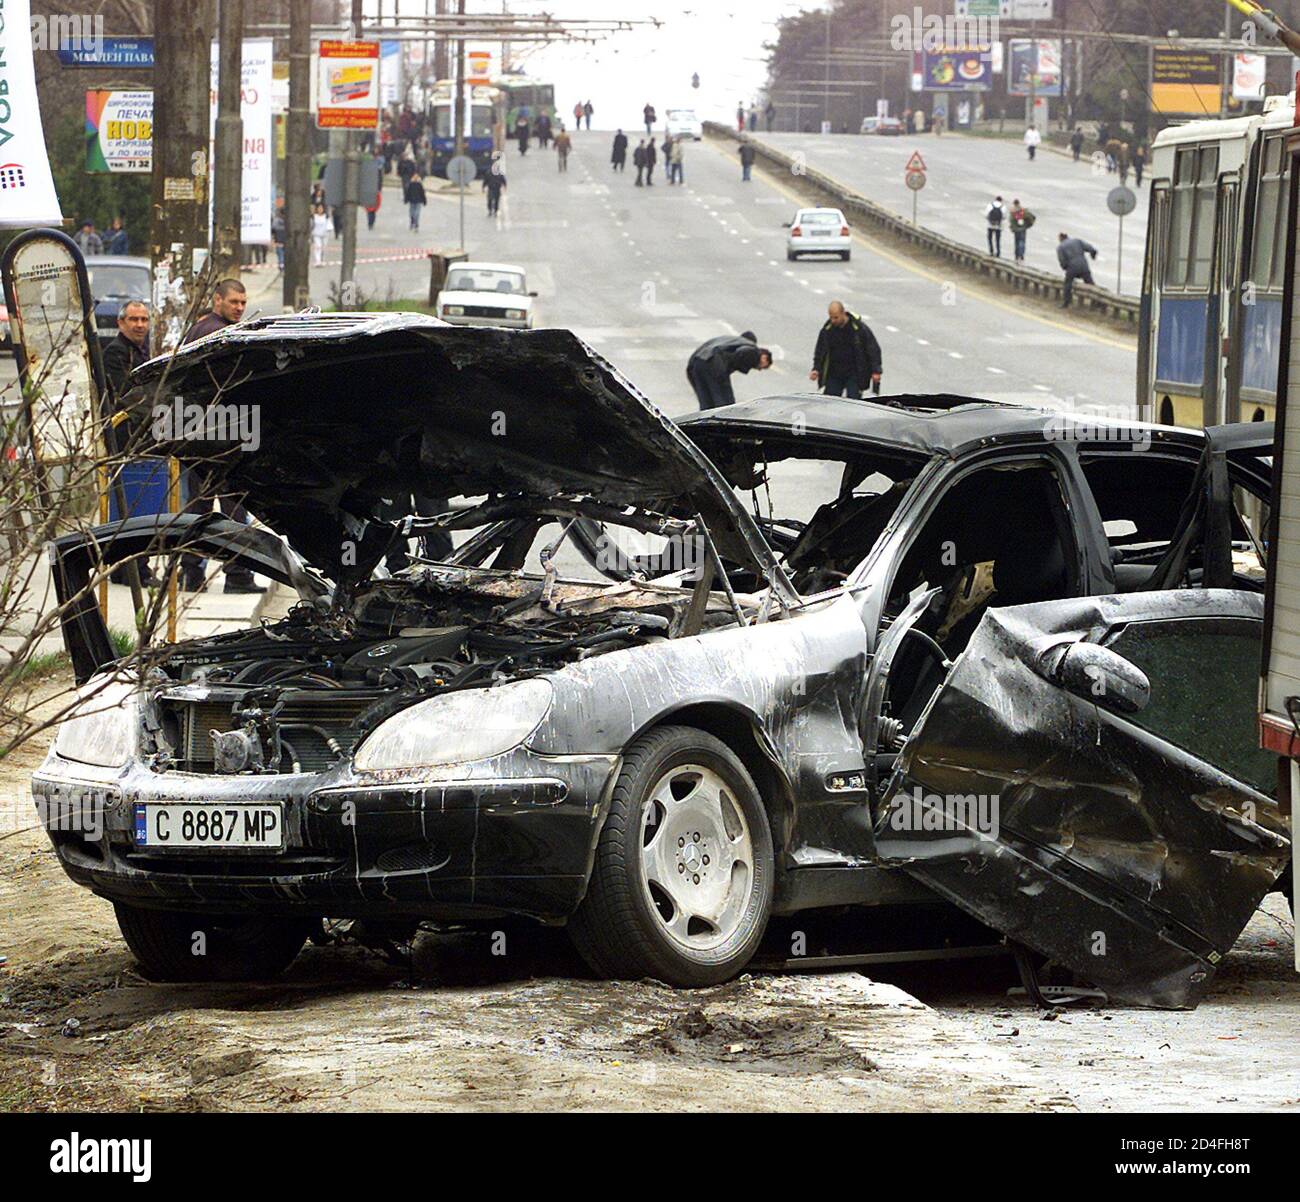 Bulgarian plainclothes policemen ivestigate an explosion that blew up a Mercedes car, killing passanger and injuring the driver on Sofia's central Tsarigradsko Shosse boulevard on April 18, 2003. Police closed the six-lane boulevard and launched investigation into the case. REUTERS/Stoyan Nenov  SN/ Stock Photo